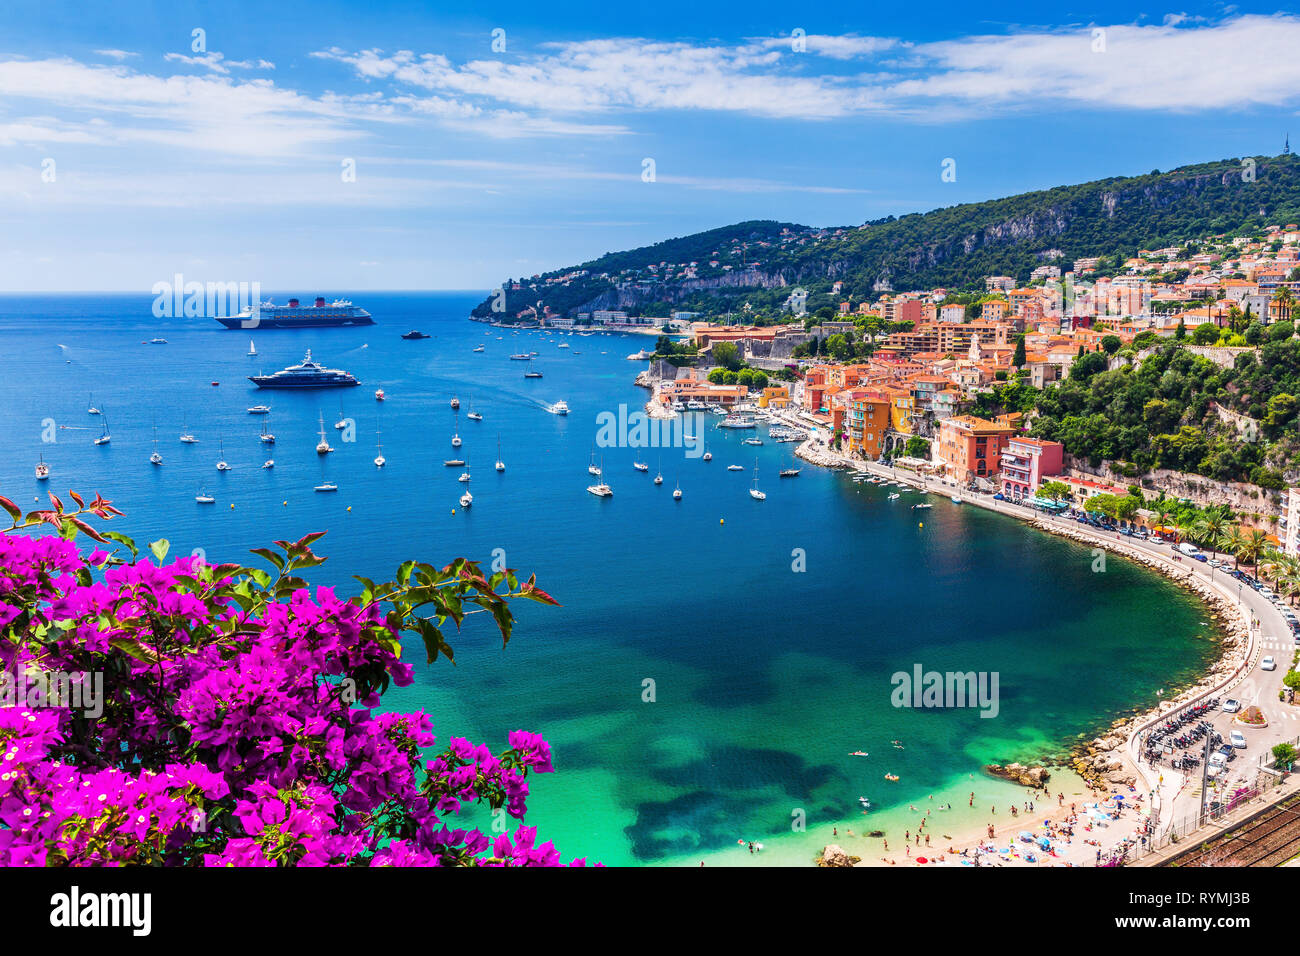 Villefranche sur Mer, France. Seaside town on the French Riviera (or Côte d'Azur). Stock Photo